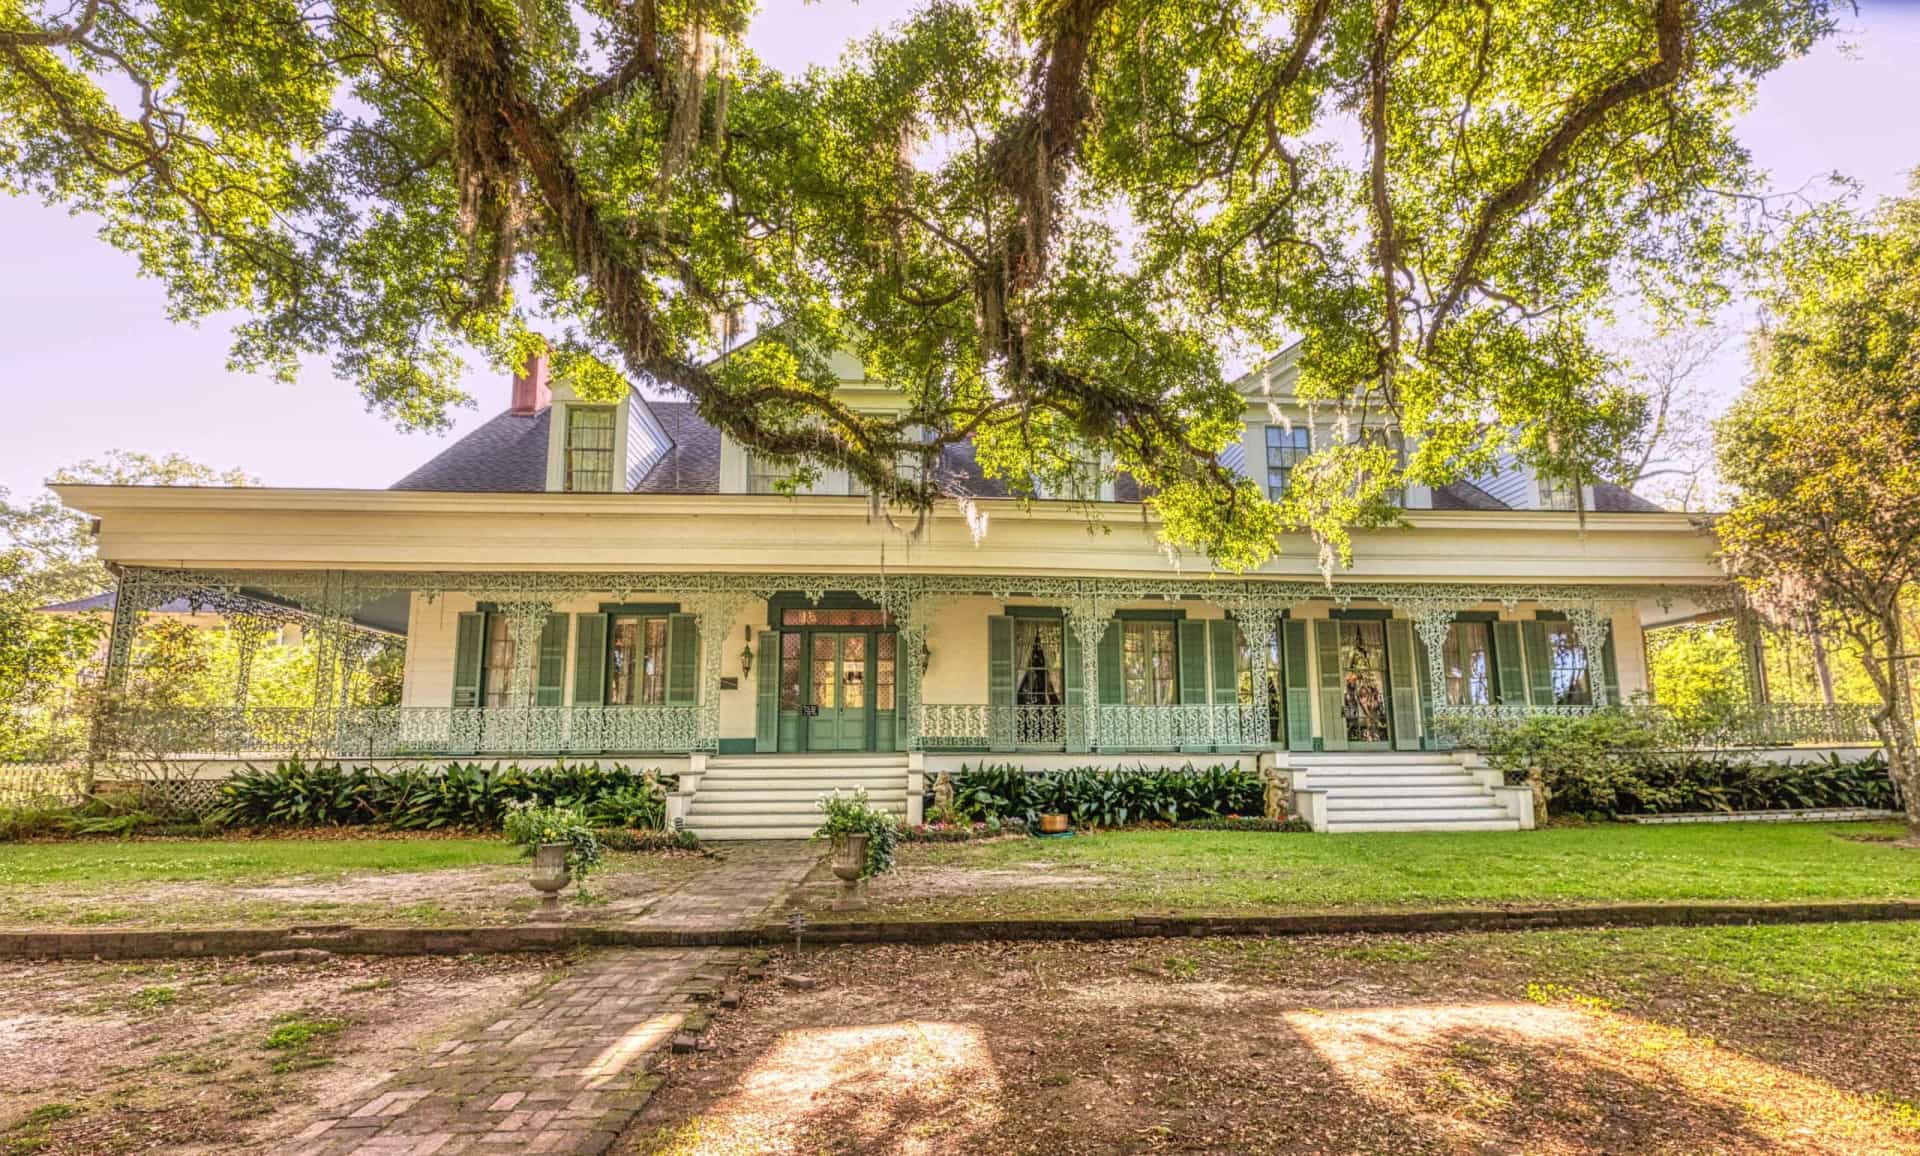 <p>The Lalaurie Mansion and the tomb of Marie Laveau are strong contenders for the most haunted locations in Louisiana, but it's the Myrtles Plantation in St. Francisville that takes the top spot. It's allegedly home to 12 different ghosts, including that of a young enslaved girl named Chloe.</p>